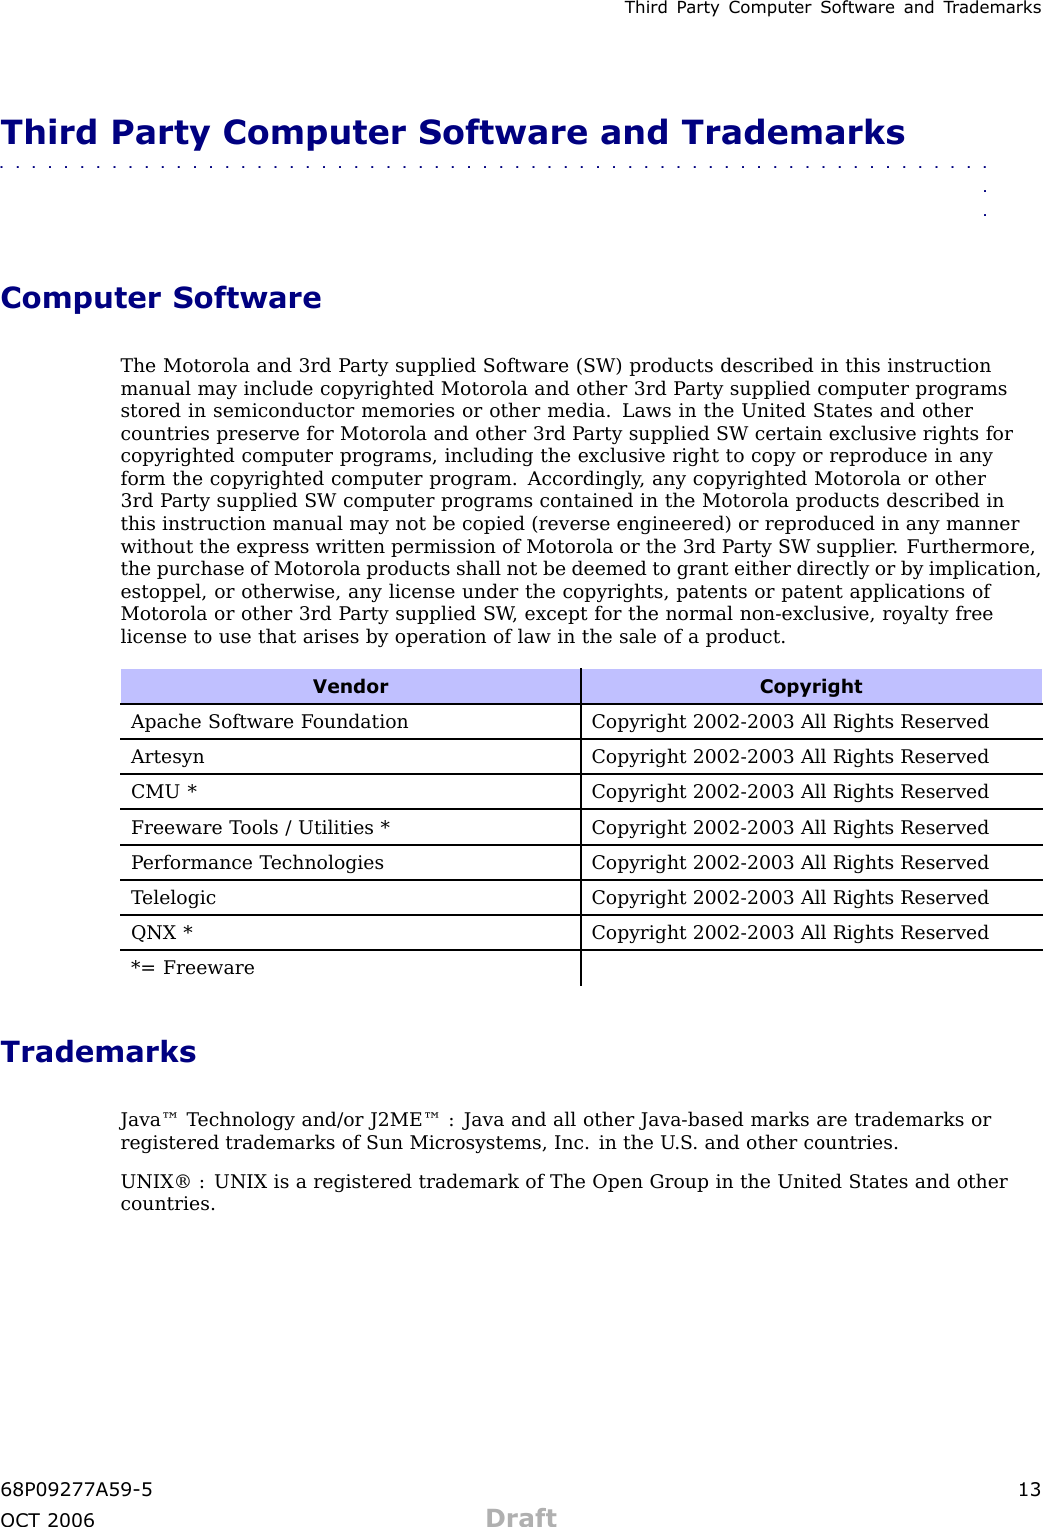 Third P art y Computer Softw are and T r ademarksThird Party Computer Software and Trademarks■■■■■■■■■■■■■■■■■■■■■■■■■■■■■■■■■■■■■■■■■■■■■■■■■■■■■■■■■■■■■■■■Computer SoftwareThe Motorola and 3rd P arty supplied Software (SW) products described in this instructionmanual may include copyrighted Motorola and other 3rd P arty supplied computer programsstored in semiconductor memories or other media. Laws in the United States and othercountries preserve for Motorola and other 3rd P arty supplied SW certain exclusive rights forcopyrighted computer programs, including the exclusive right to copy or reproduce in anyform the copyrighted computer program. Accordingly , any copyrighted Motorola or other3rd P arty supplied SW computer programs contained in the Motorola products described inthis instruction manual may not be copied (reverse engineered) or reproduced in any mannerwithout the express written permission of Motorola or the 3rd P arty SW supplier . Furthermore,the purchase of Motorola products shall not be deemed to grant either directly or by implication,estoppel, or otherwise, any license under the copyrights, patents or patent applications ofMotorola or other 3rd P arty supplied SW , except for the normal non -exclusive, royalty freelicense to use that arises by operation of law in the sale of a product.Vendor CopyrightApache Software F oundation Copyright 2002-2003 All Rights ReservedArtesynCopyright 2002-2003 All Rights ReservedCMU *Copyright 2002-2003 All Rights ReservedFreeware T ools / Utilities * Copyright 2002-2003 All Rights ReservedP erformance T echnologies Copyright 2002-2003 All Rights ReservedT elelogic Copyright 2002-2003 All Rights ReservedQNX *Copyright 2002-2003 All Rights Reserved*= FreewareTrademarksJava™ T echnology and/or J2ME™ : Java and all other Java -based marks are trademarks orregistered trademarks of Sun Microsystems, Inc. in the U .S . and other countries.UNIX® : UNIX is a registered trademark of The Open Group in the United States and othercountries.68P09277A59 -5 13OCT 2006 Draft